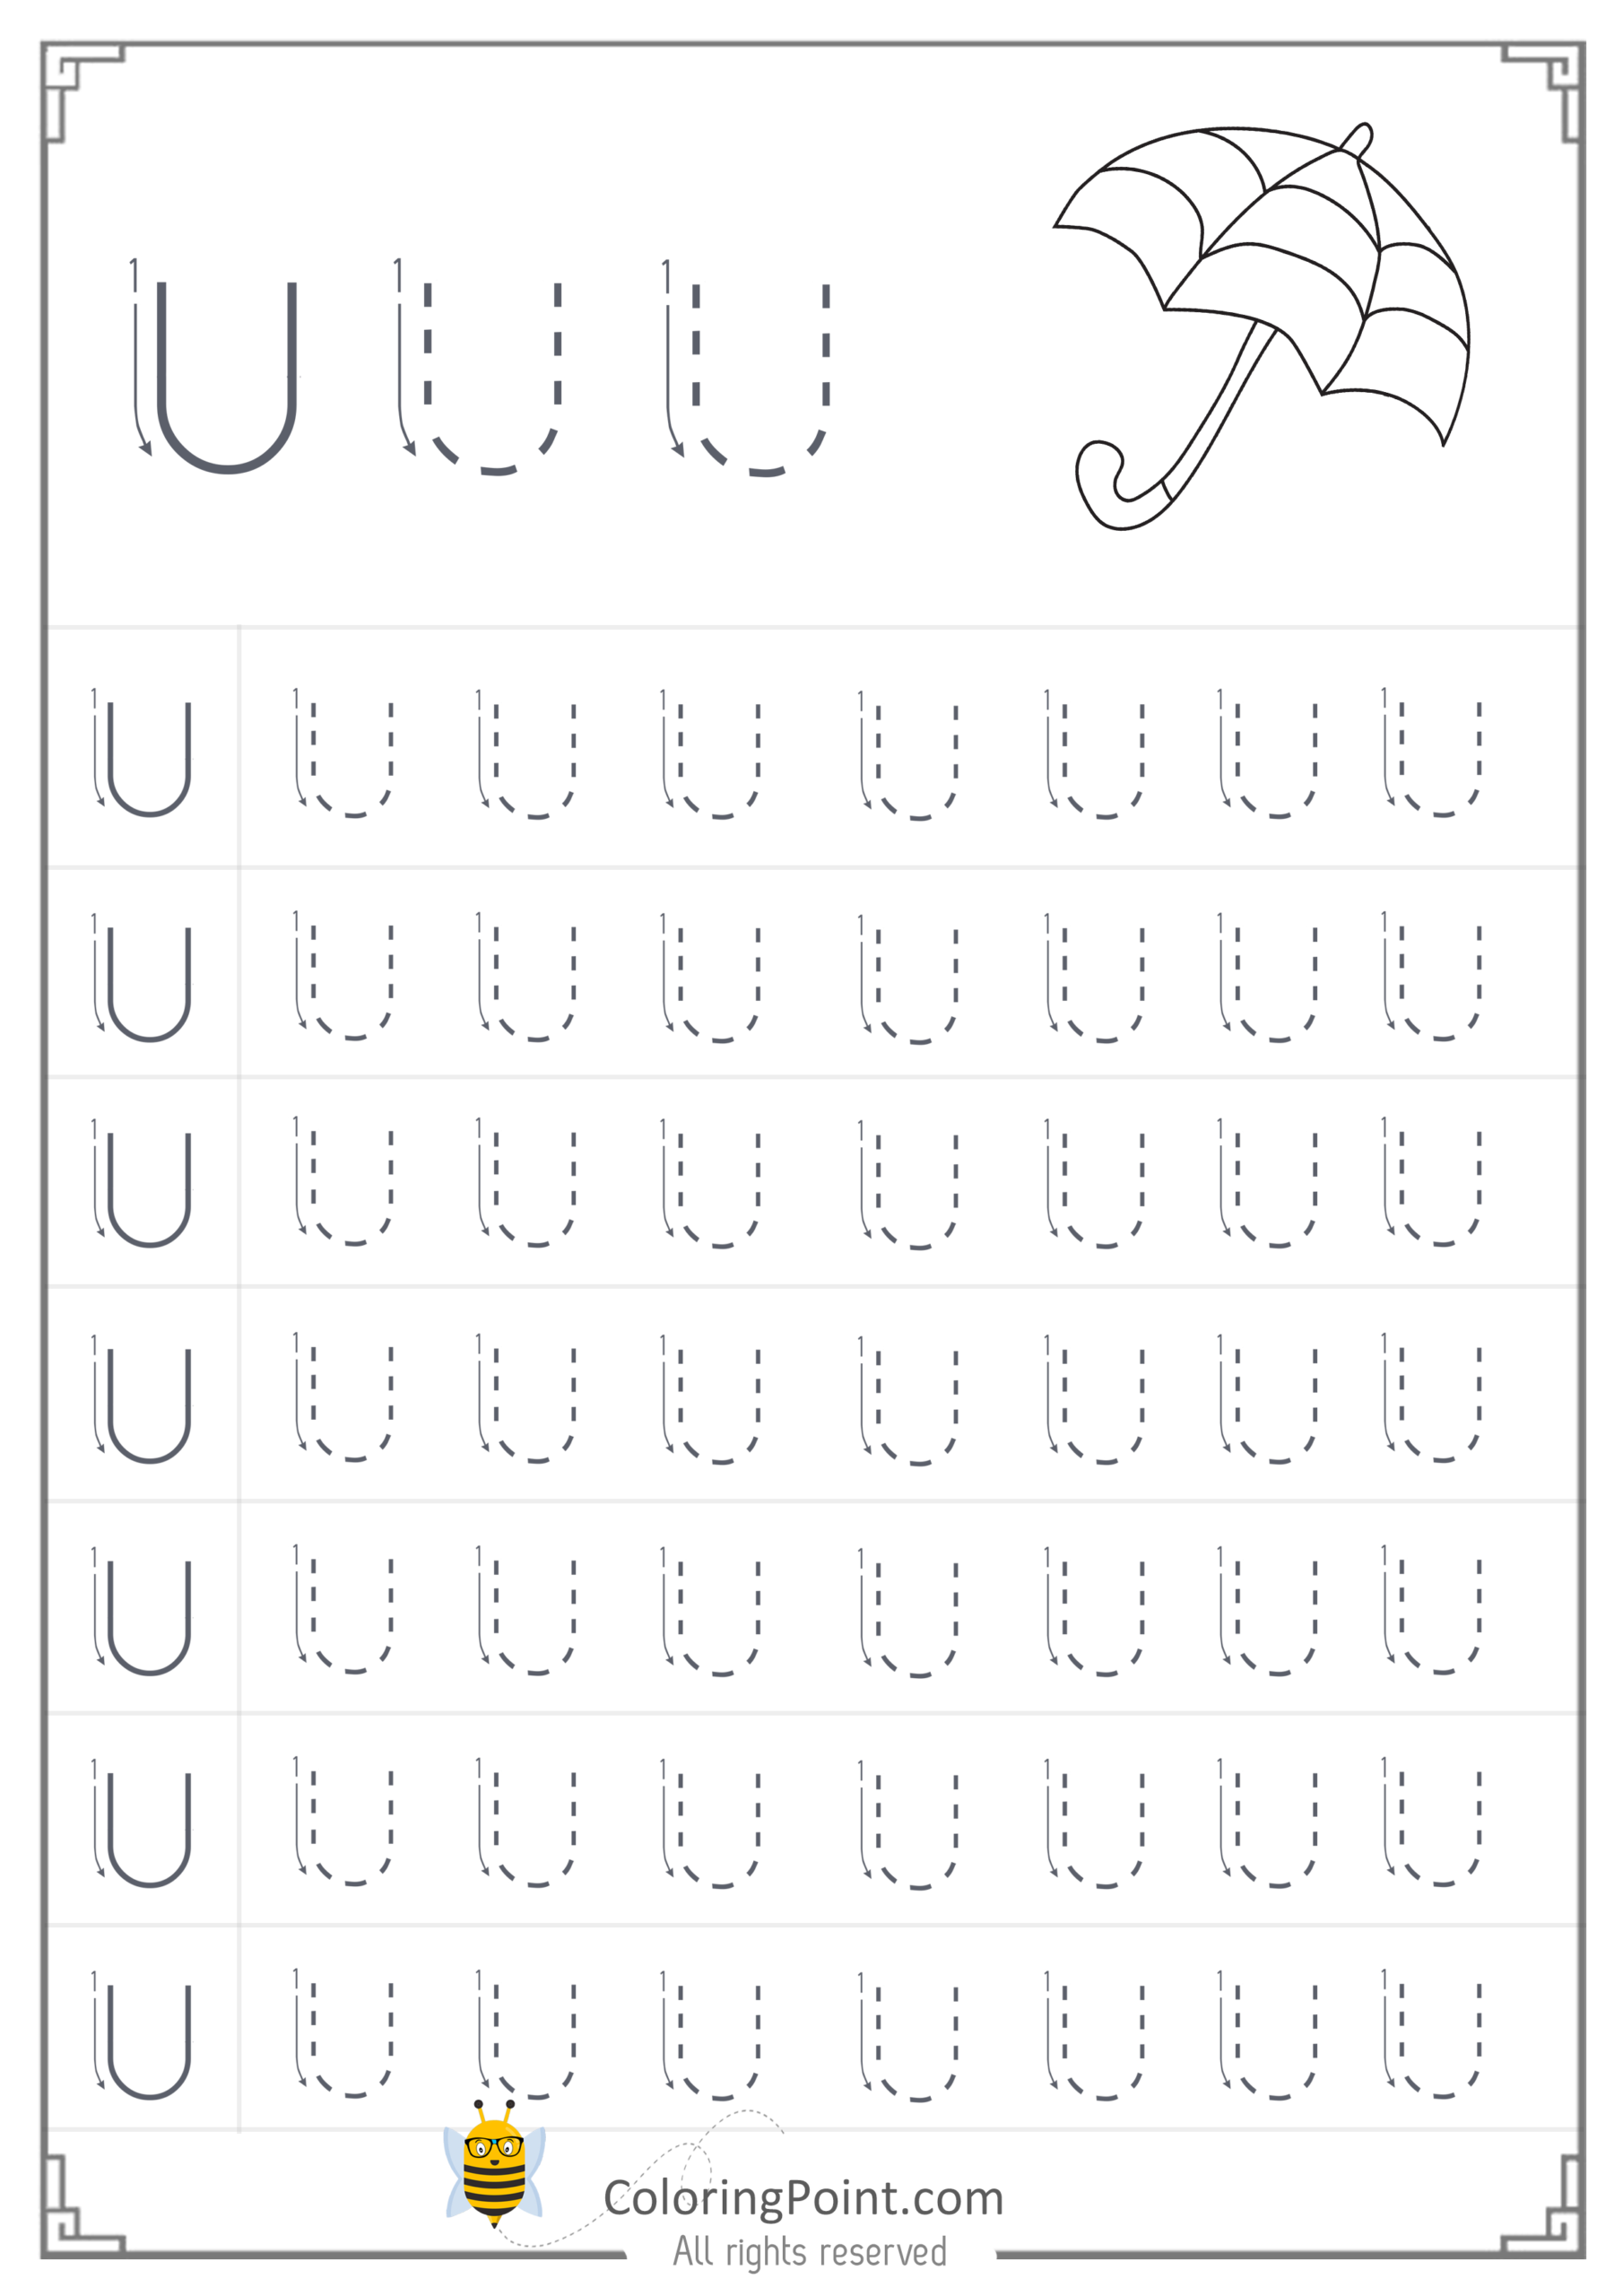 Free Printable Tracing Letter U Worksheets Preschool pertaining to U Letter Tracing